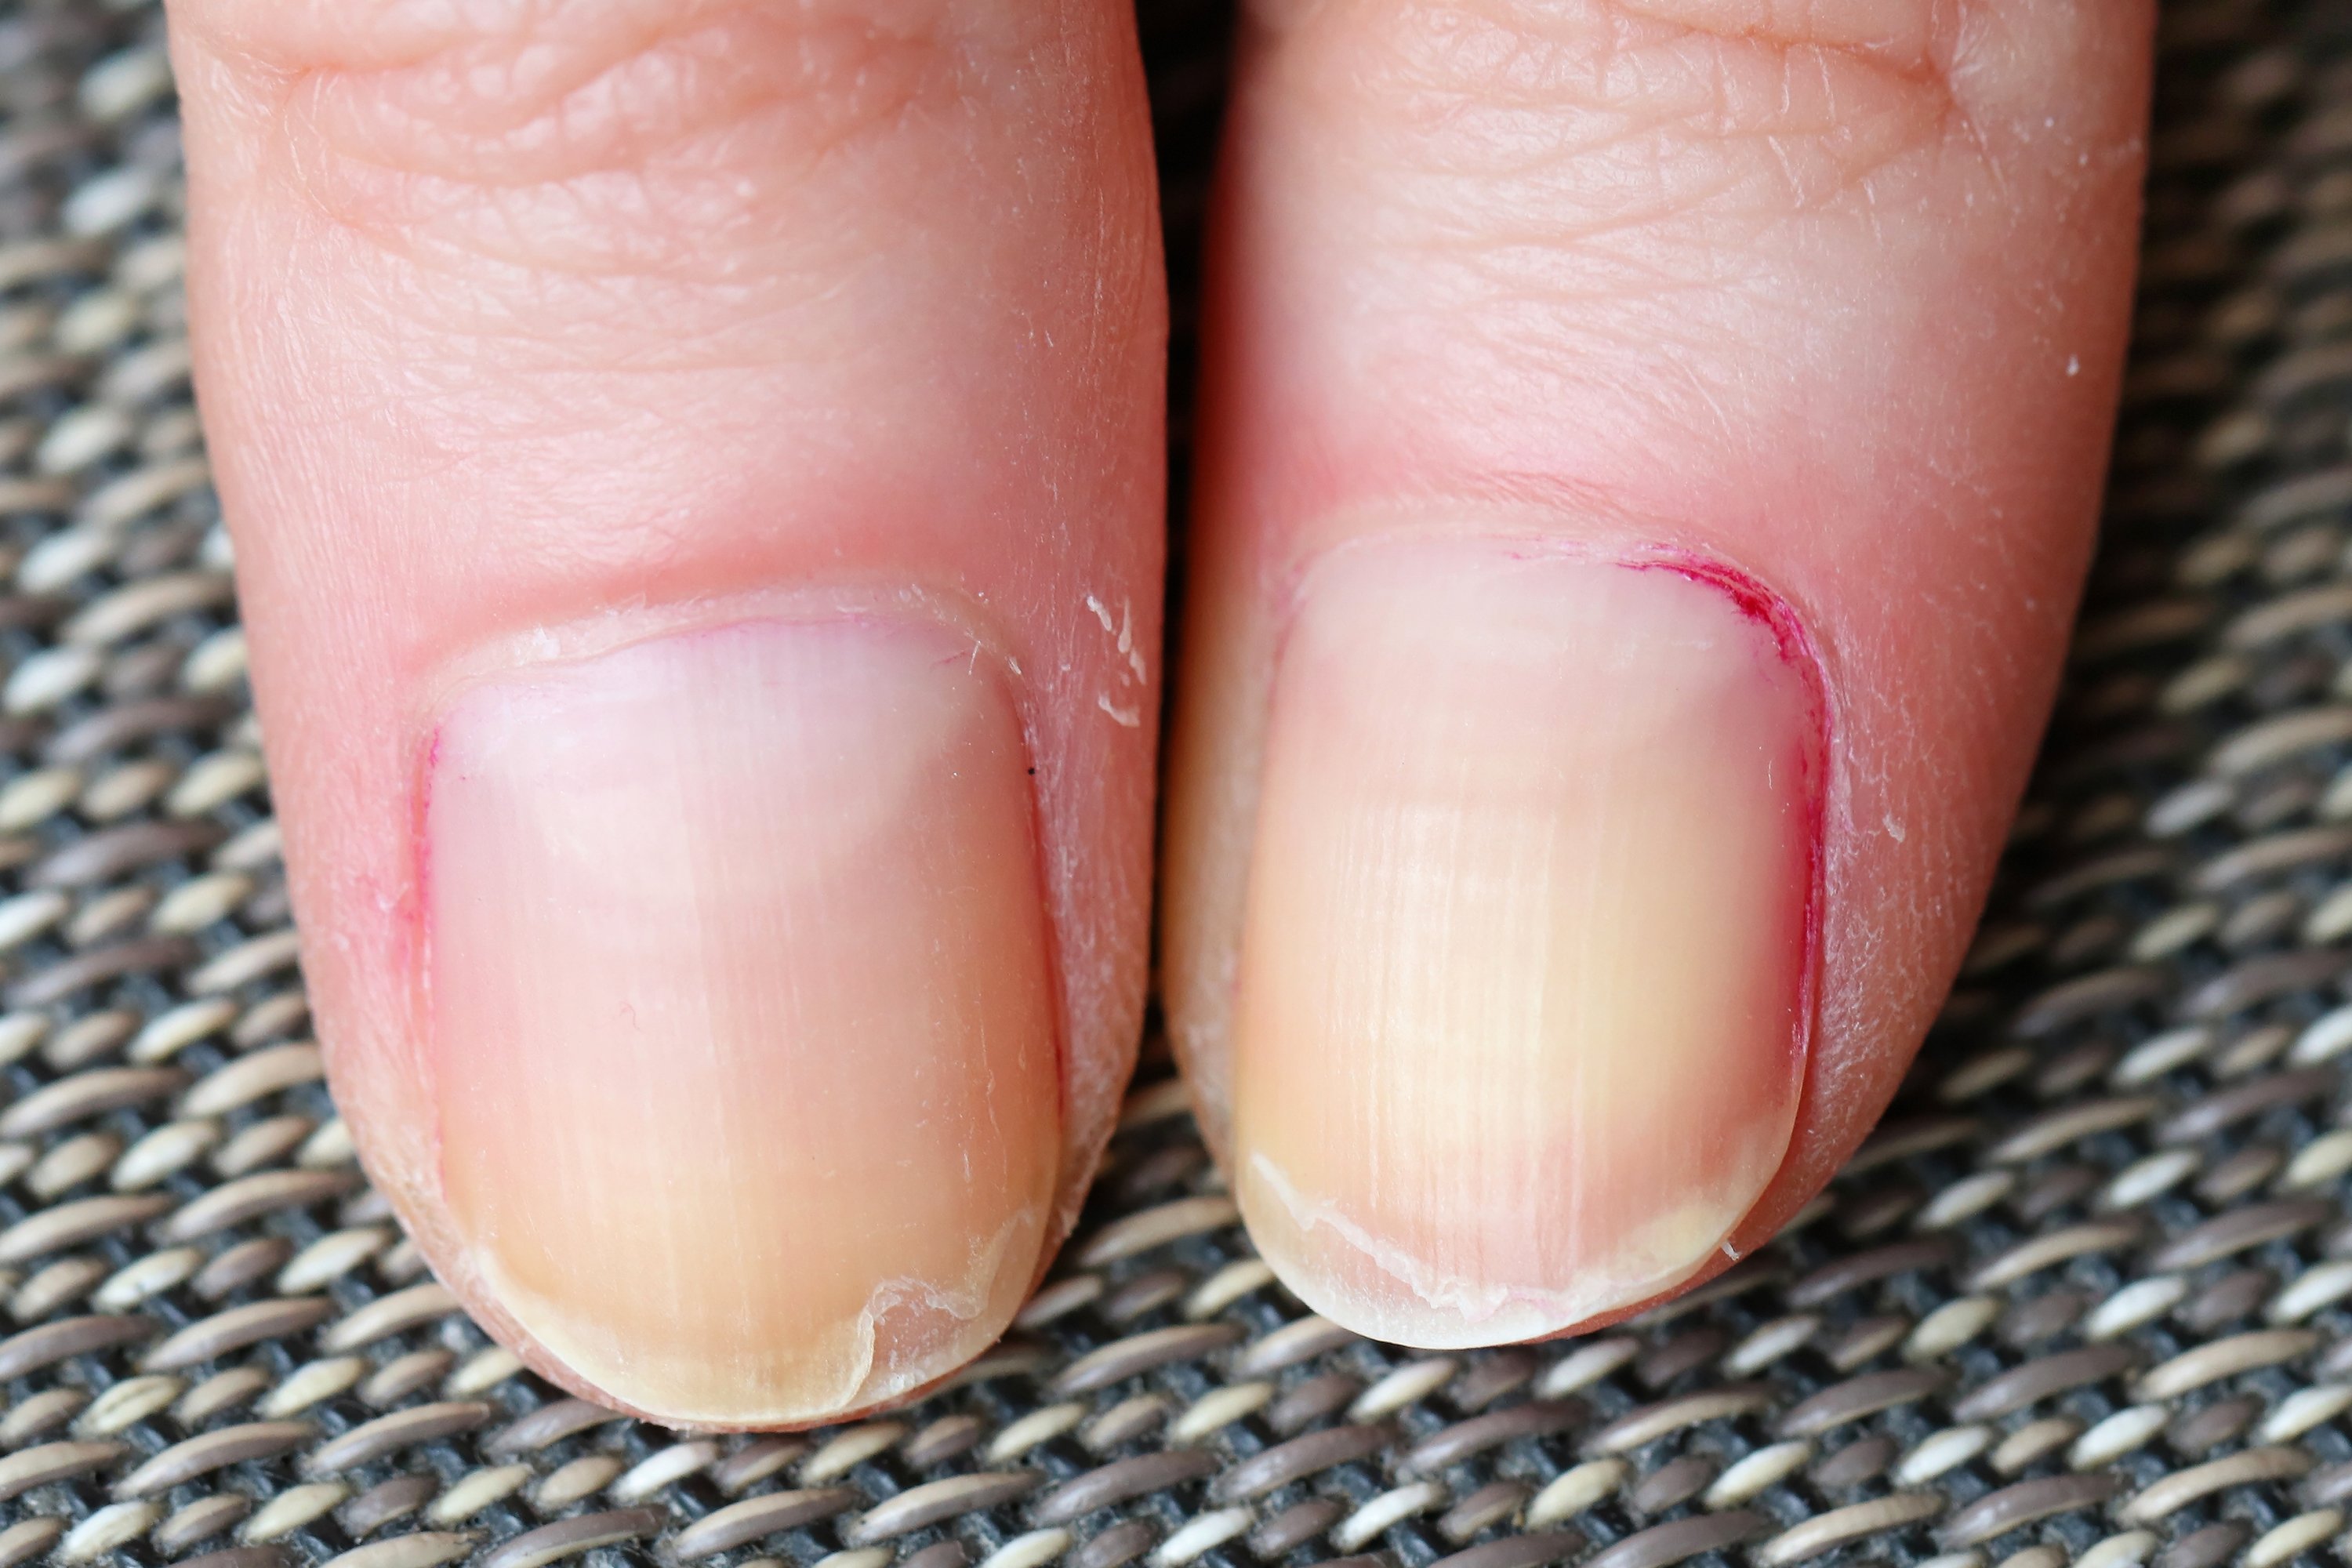 View In Full Resolution Nail Diseases And Disorders Nail Health Tongue Health